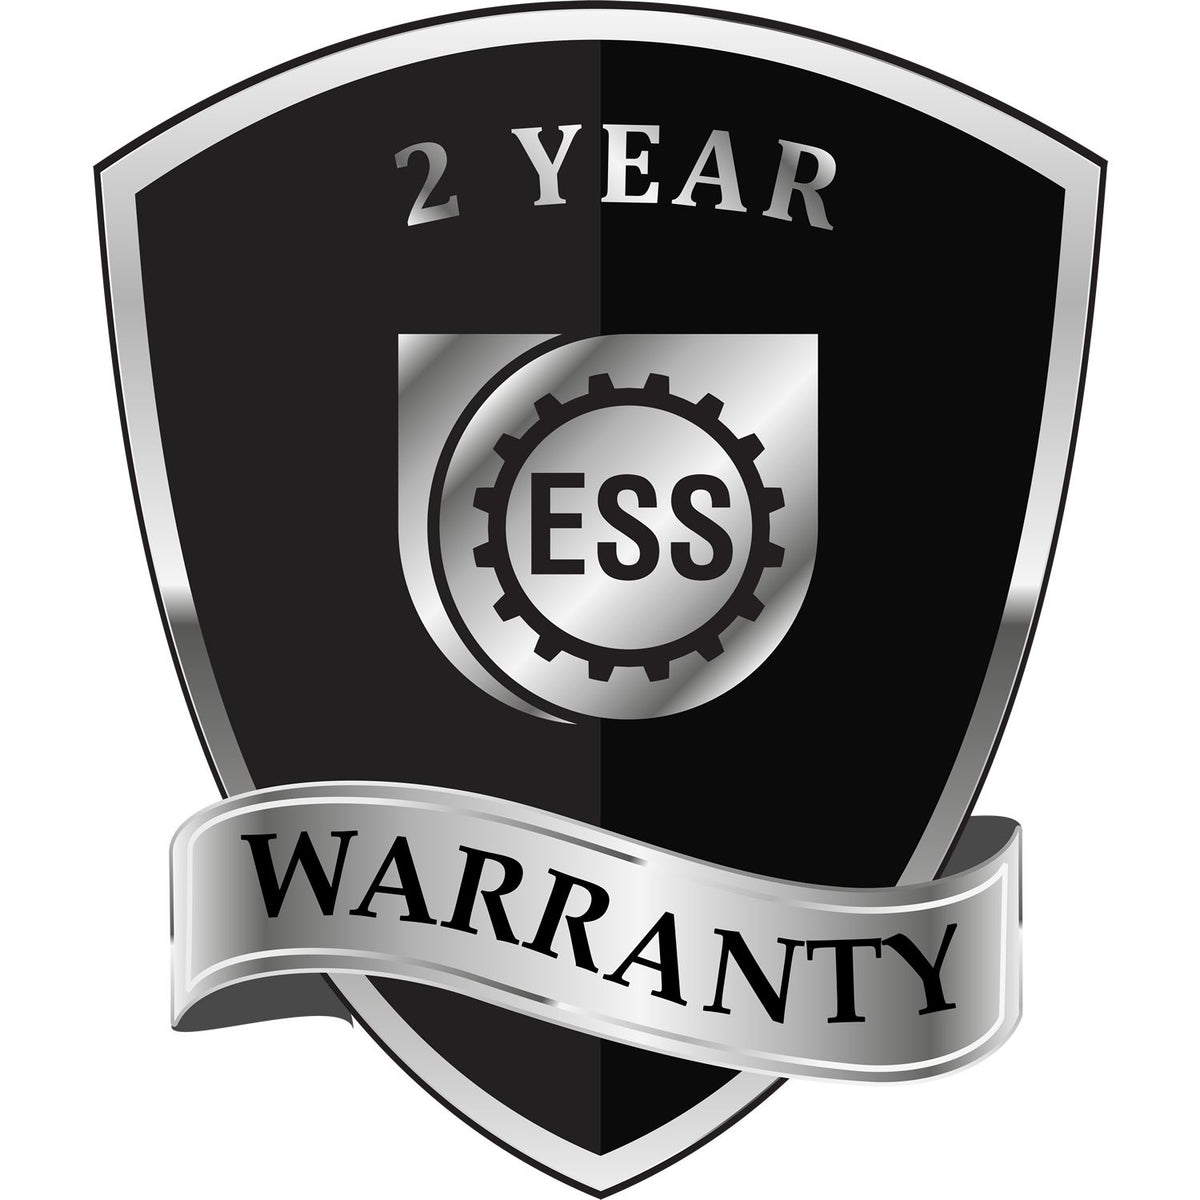 A badge or emblem showing a warranty icon for the State of Georgia Long Reach Architectural Embossing Seal